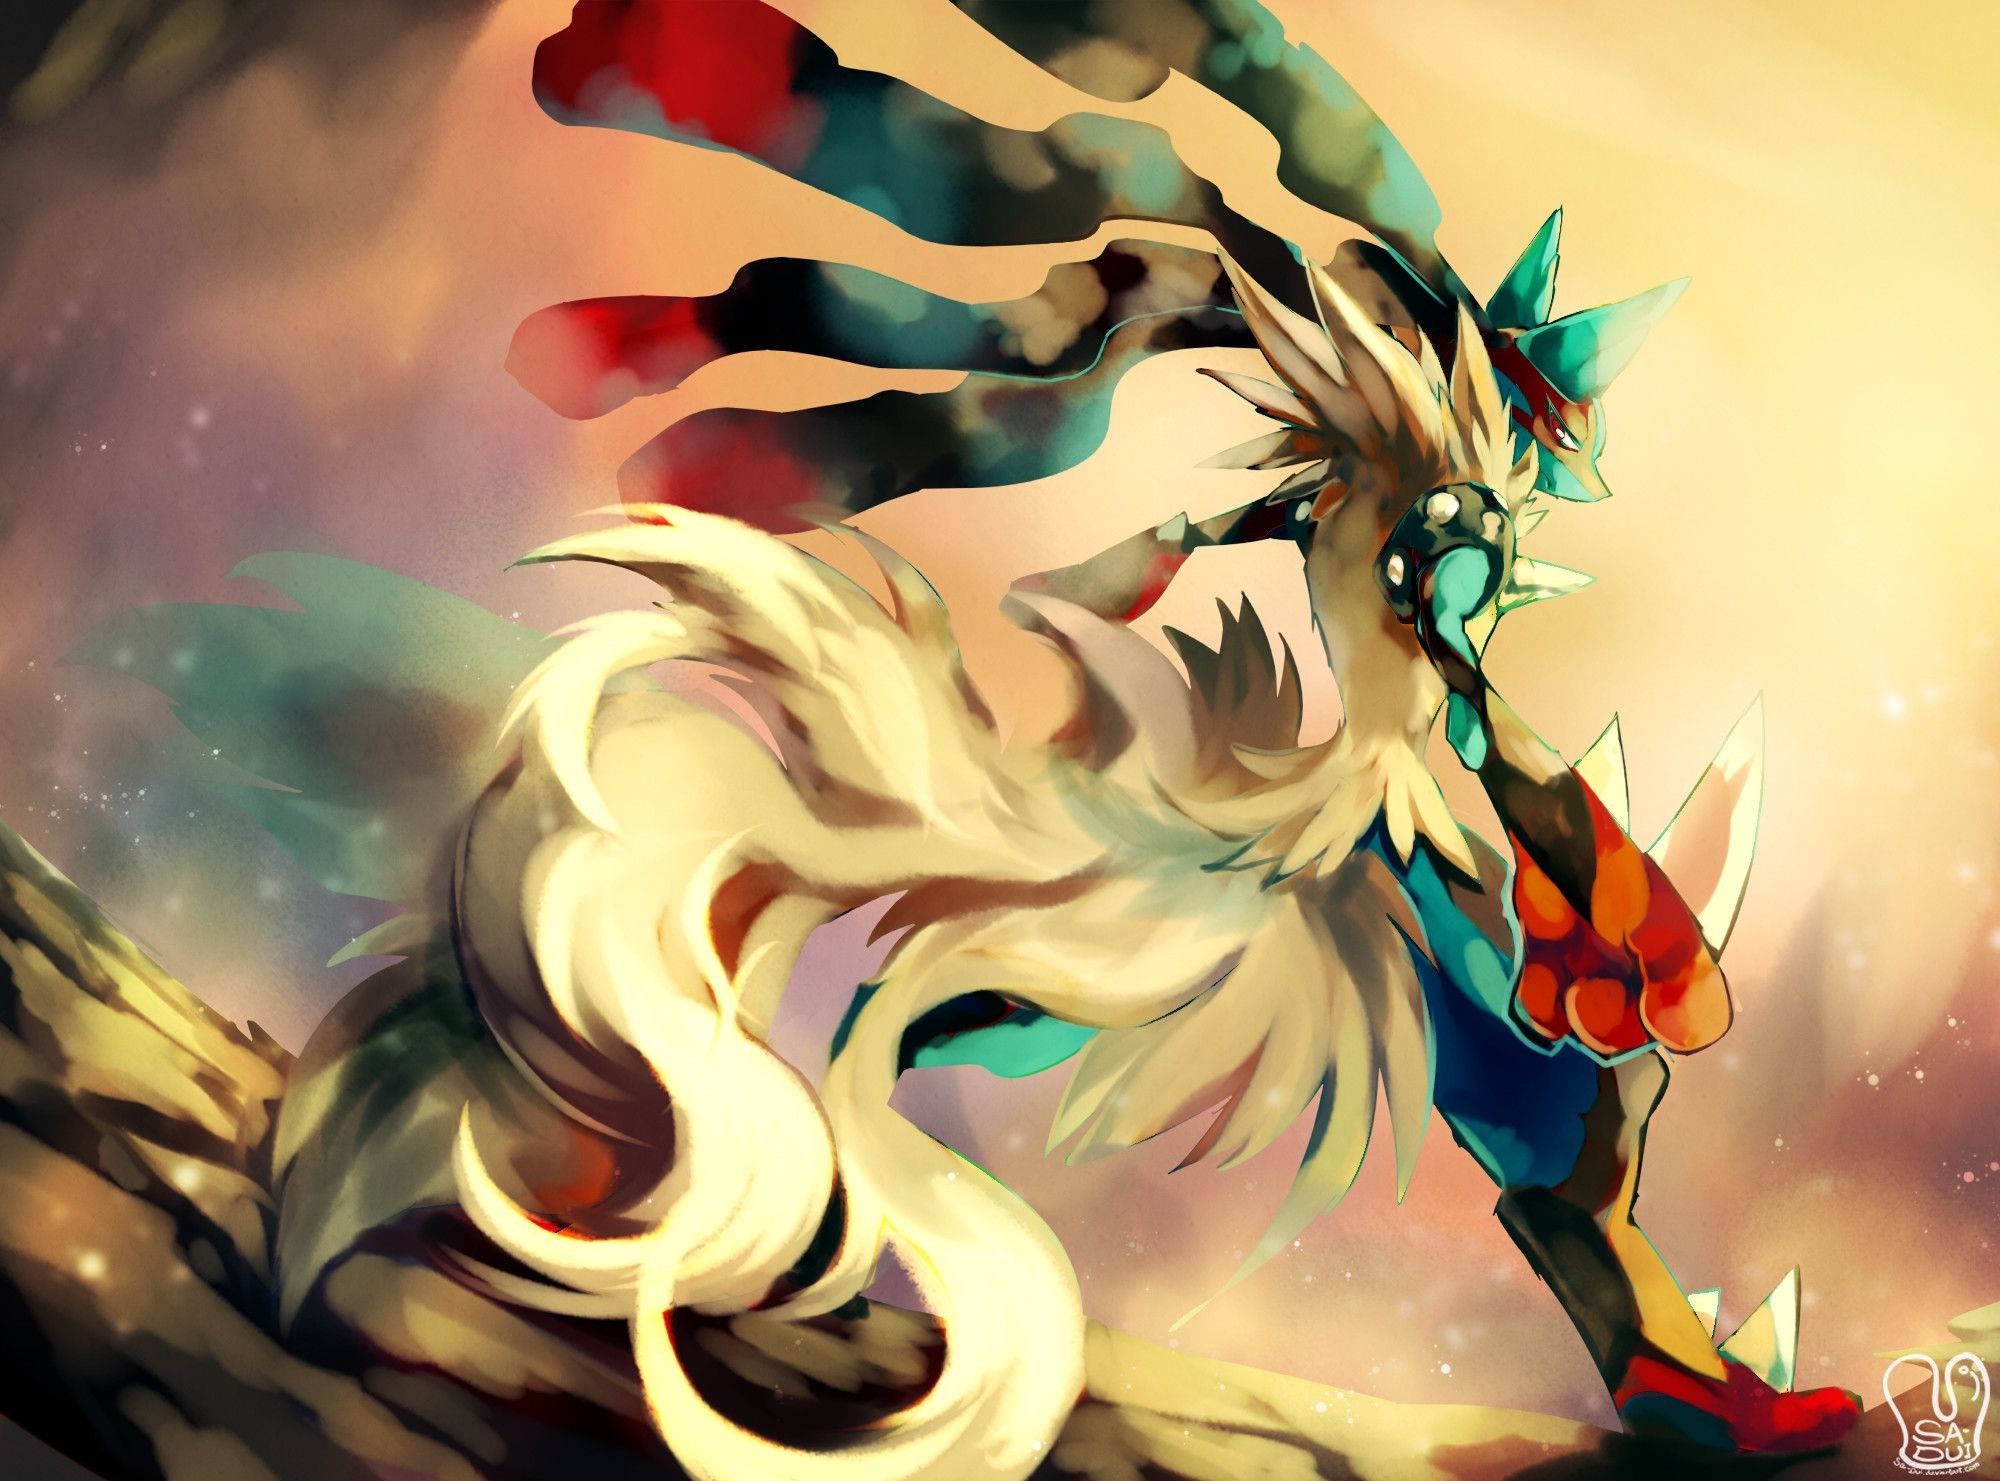 2000x1481 Mega Charizard Y iPhone Wallpaper Awesome Cool Pokemon Wallpapers Hd 71  Images